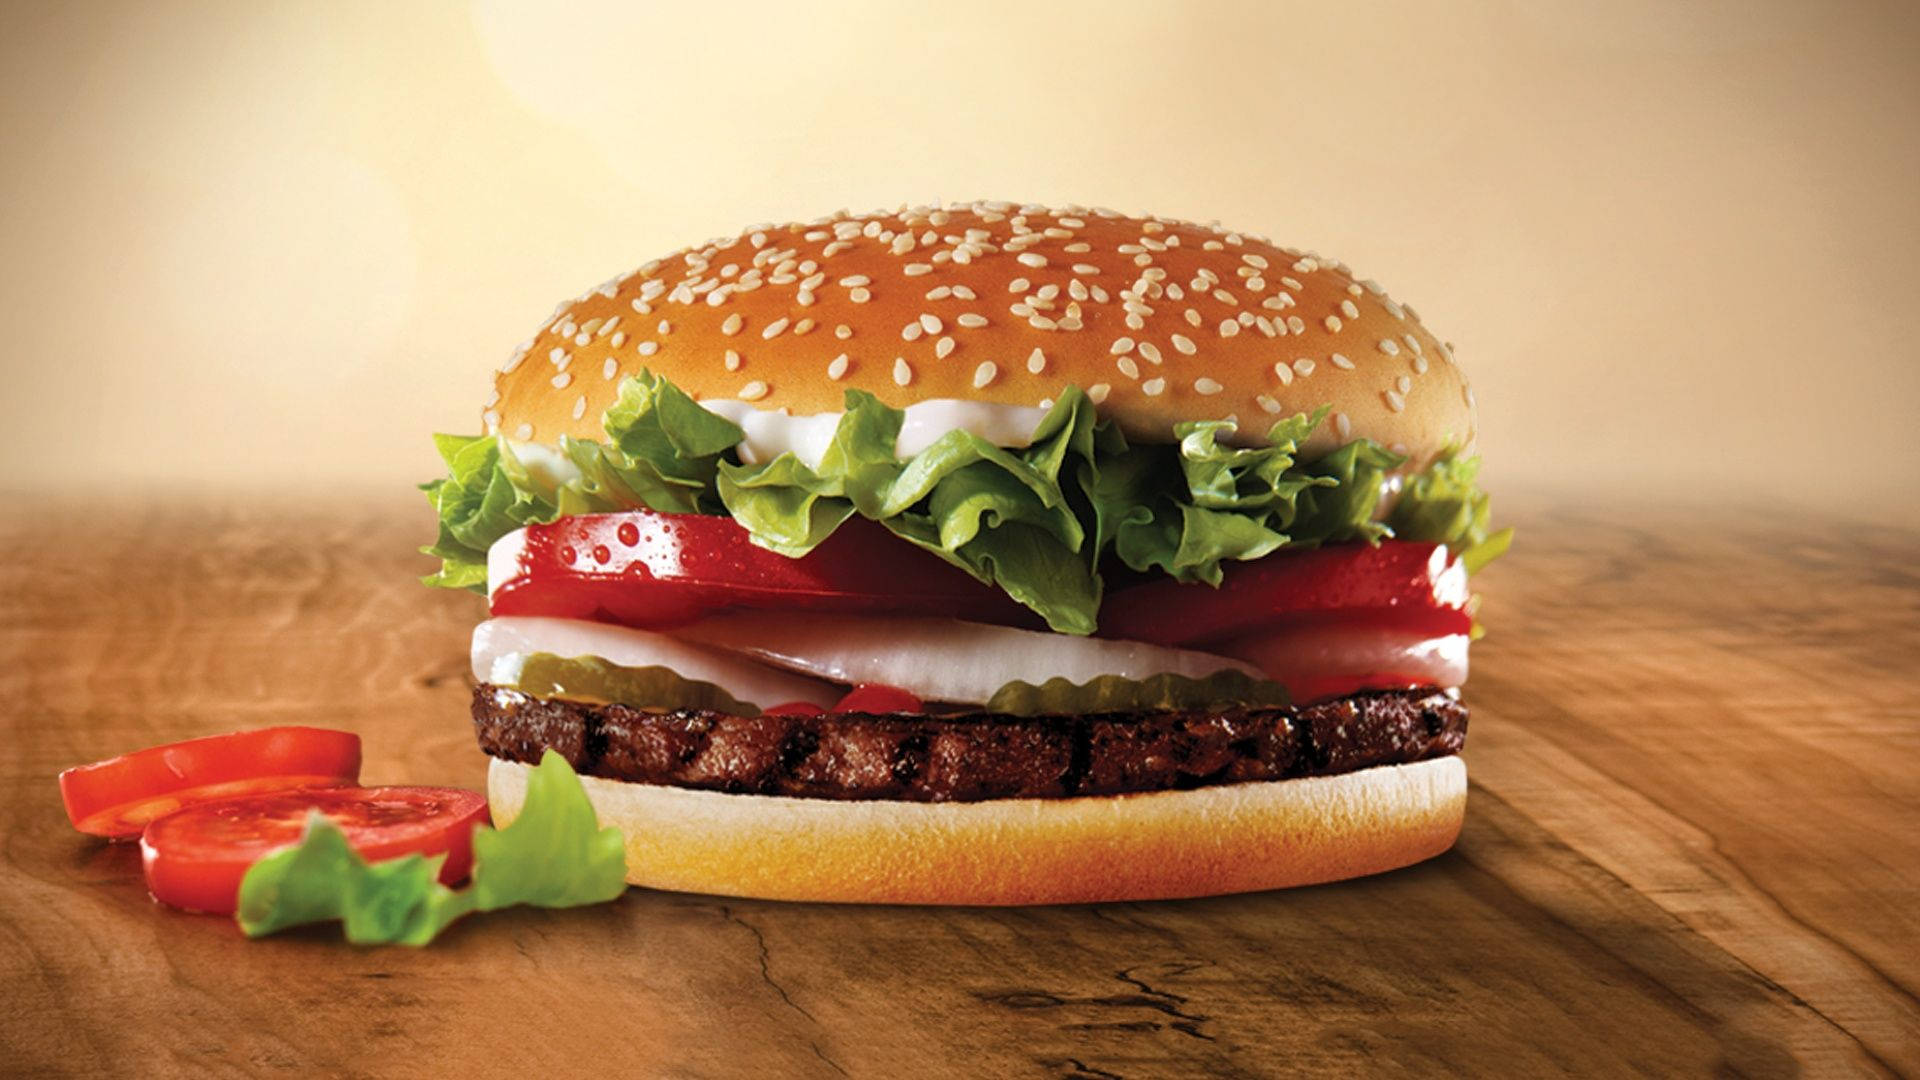 Satisfy Your Hunger With Burger King's Delectable Cheeseburger Wallpaper